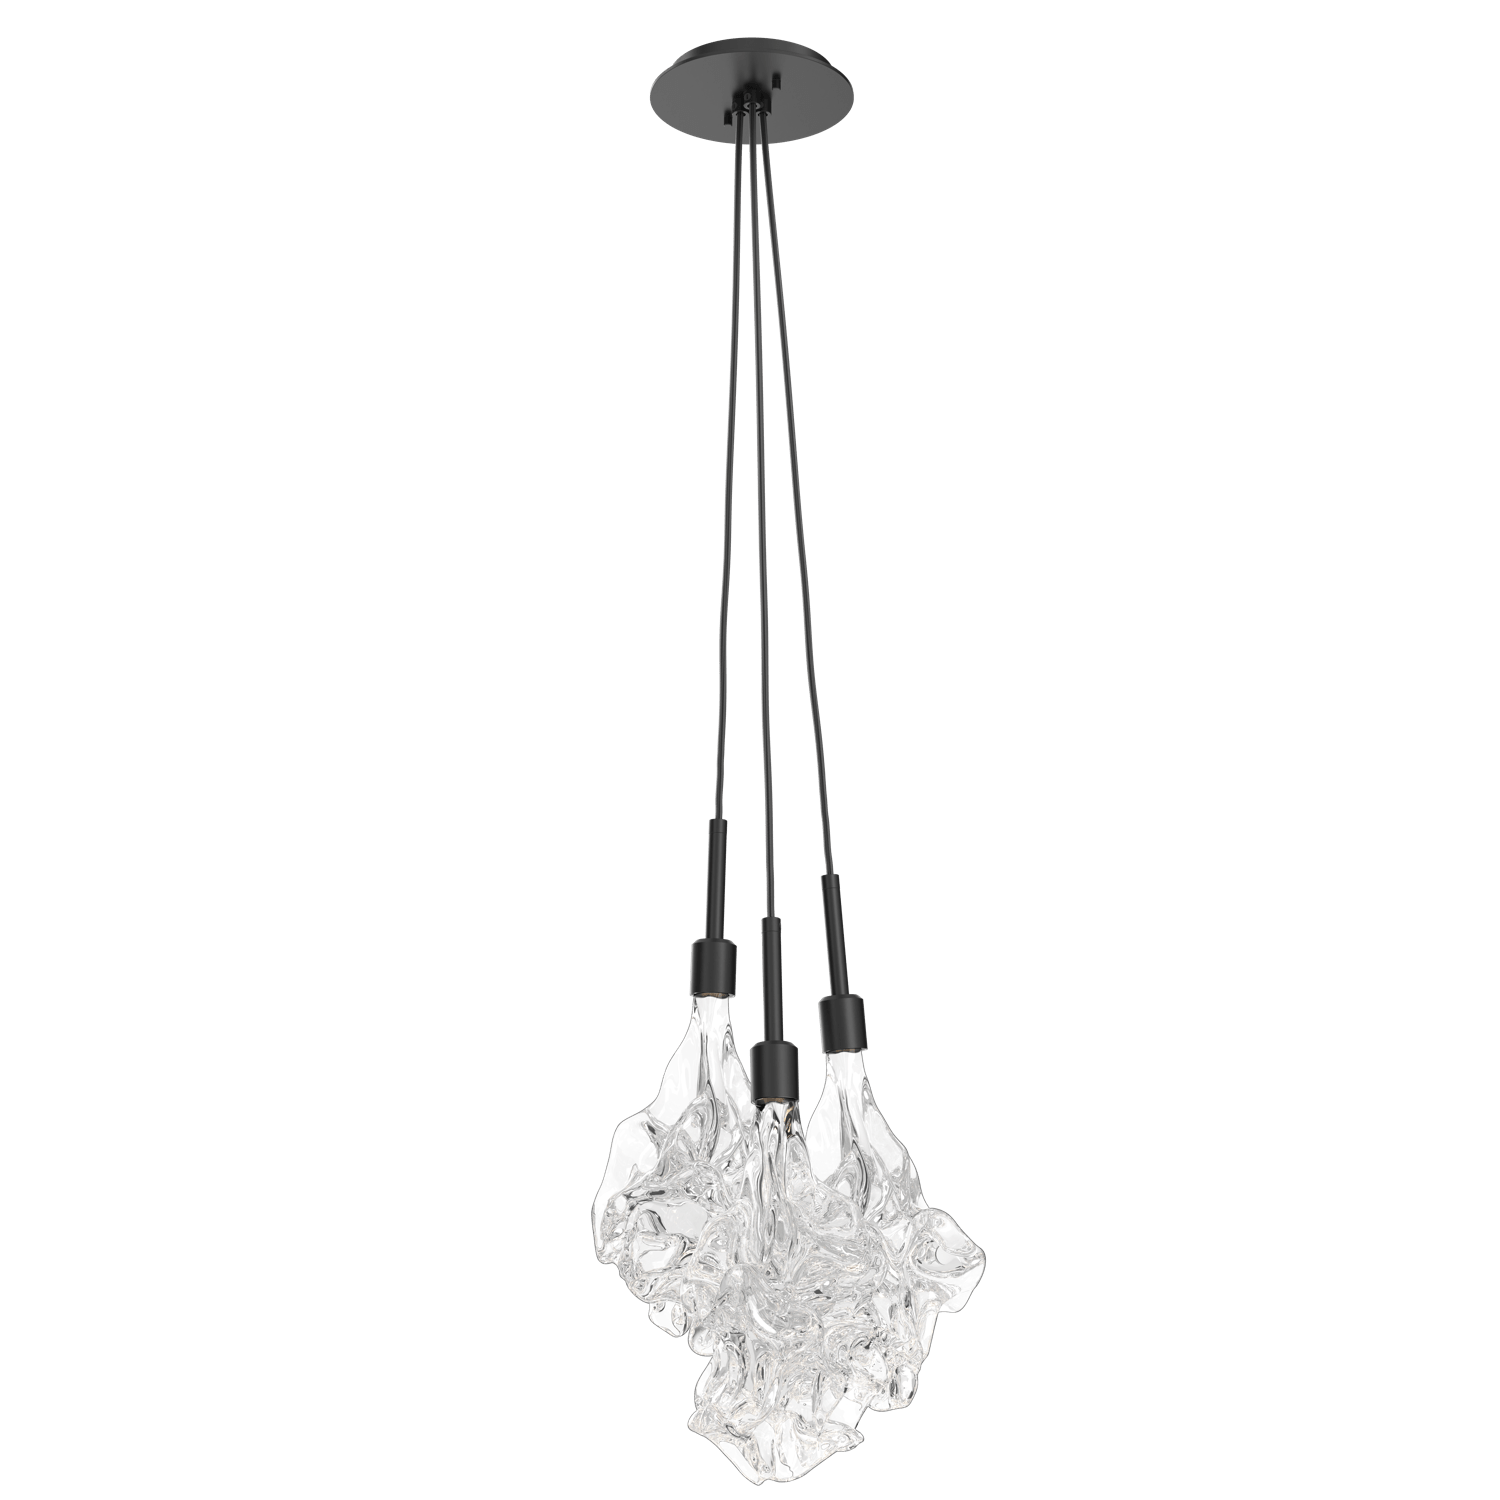 LAB0059-0A-MB-Hammerton-Studio-Blossom-3-light-cluster-pendant-light-with-matte-black-finish-and-clear-handblown-crystal-glass-shades-and-LED-lamping